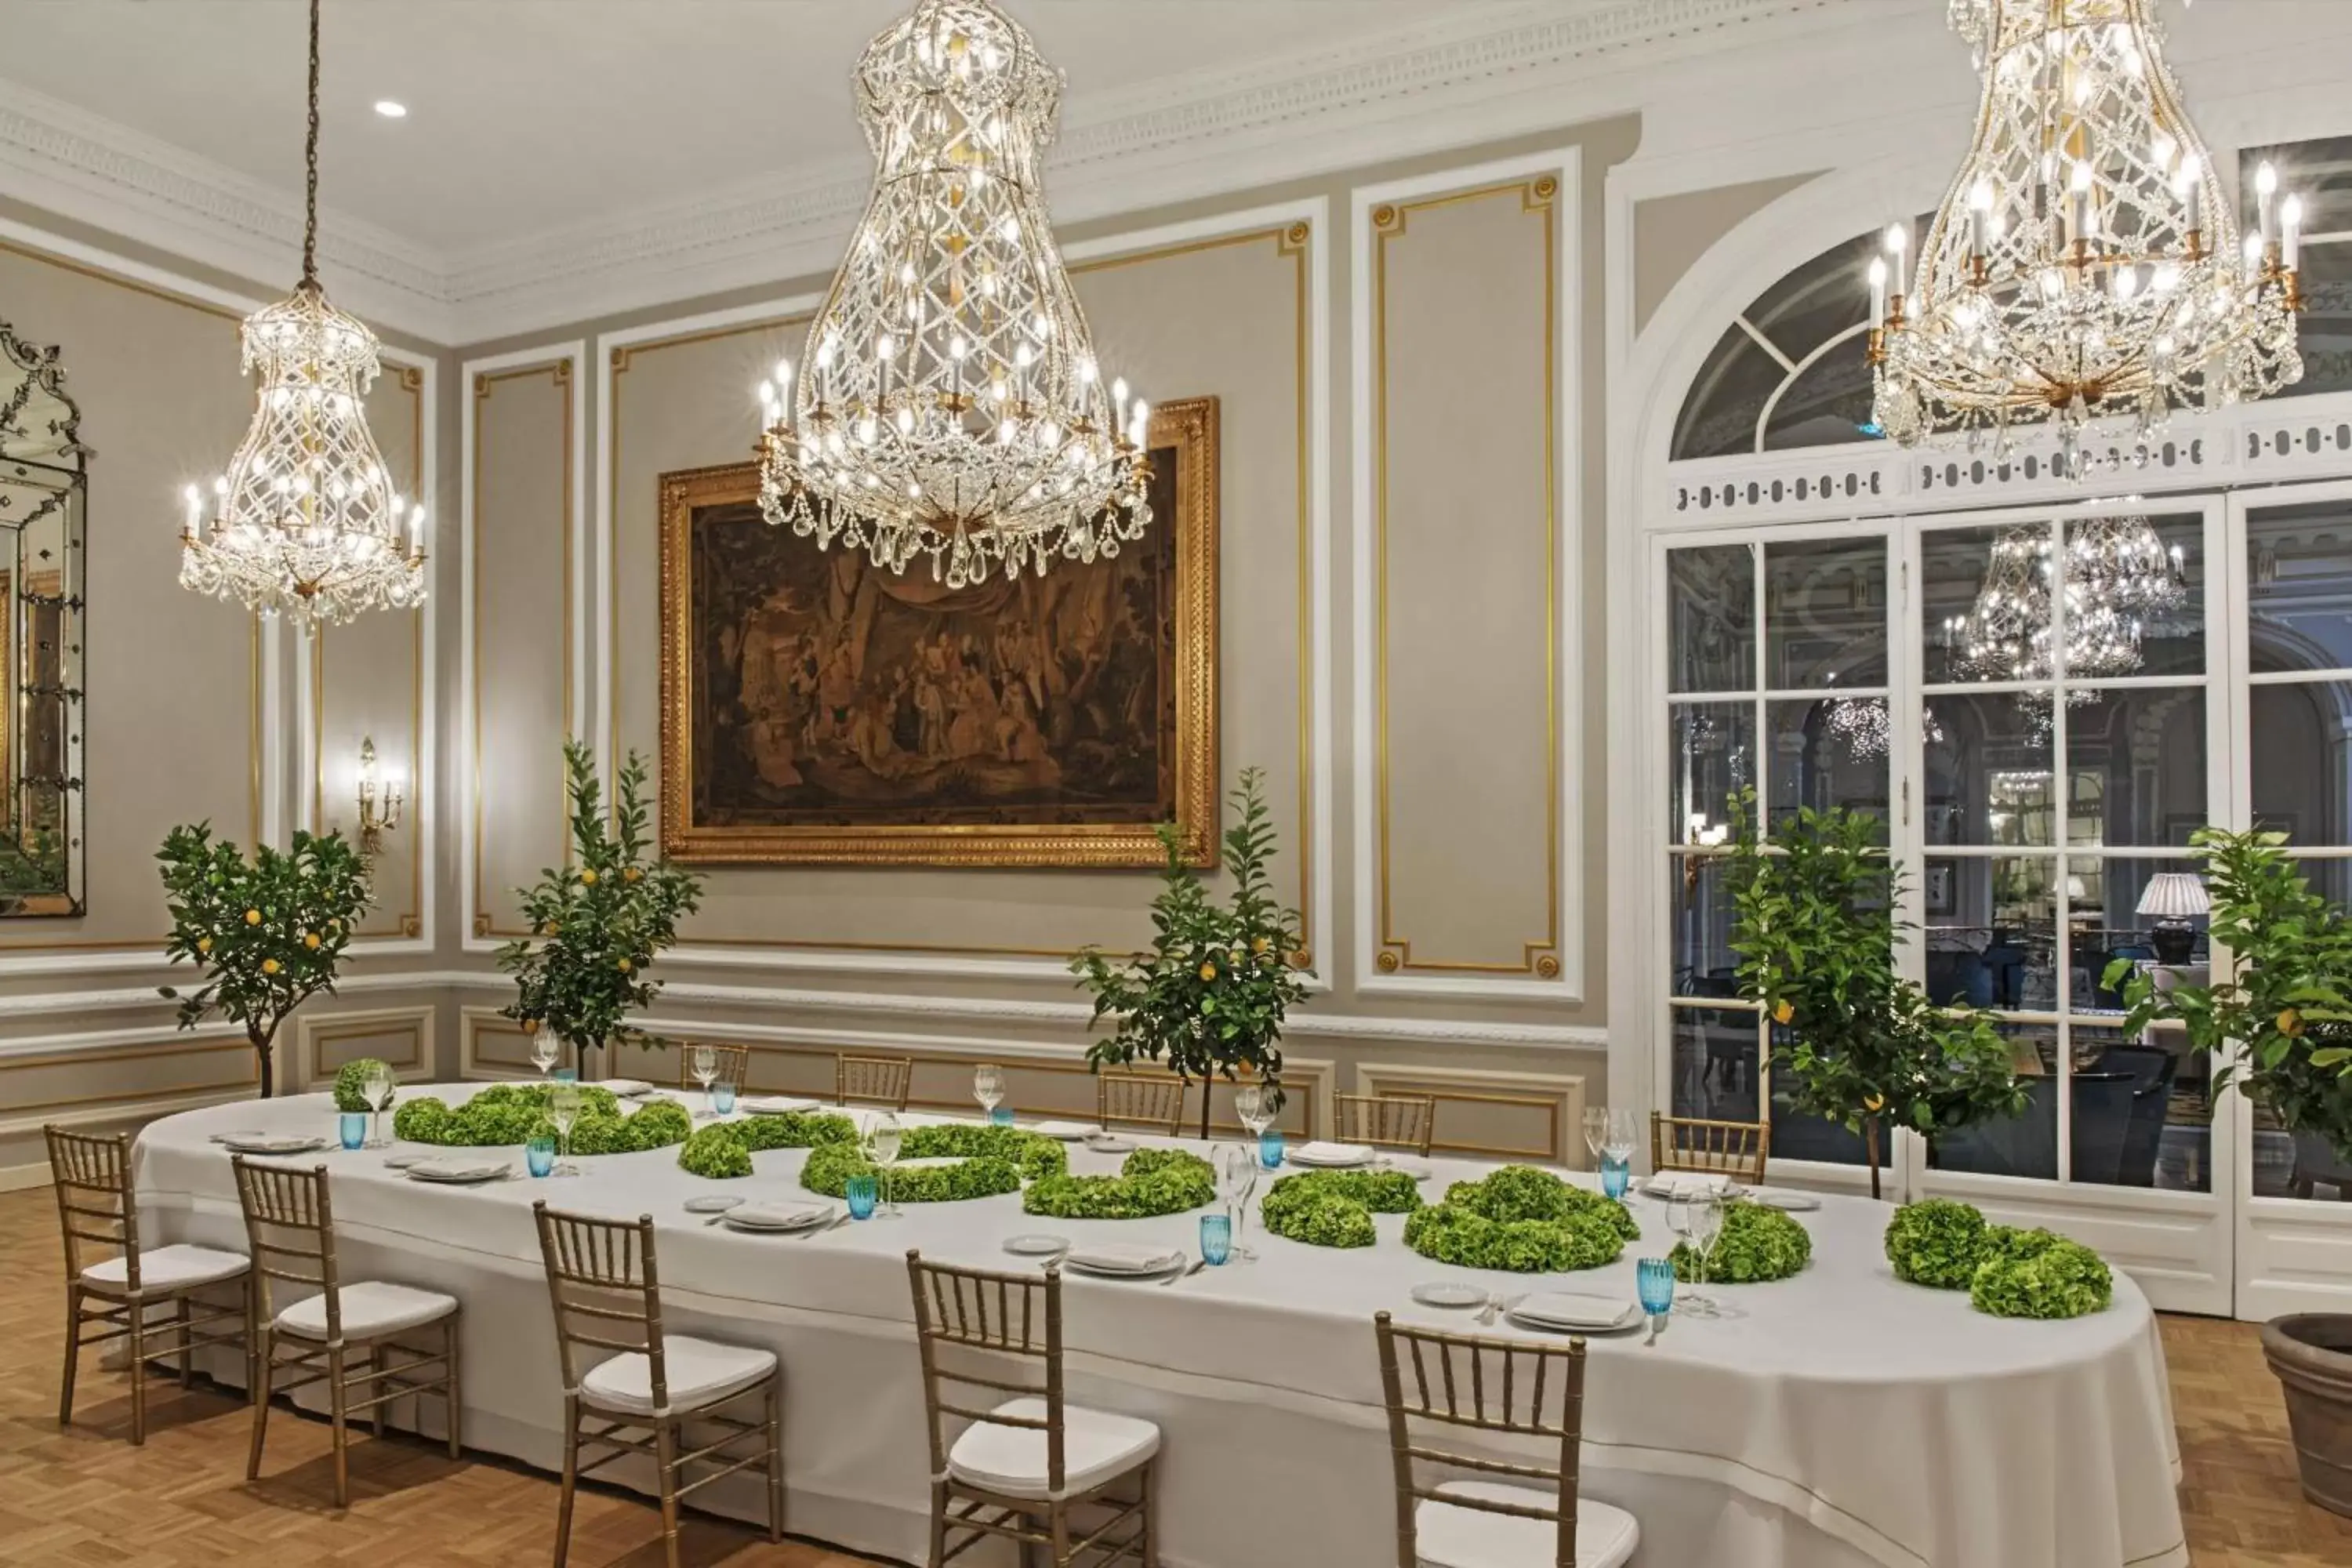 Meeting/conference room, Banquet Facilities in The St. Regis Rome